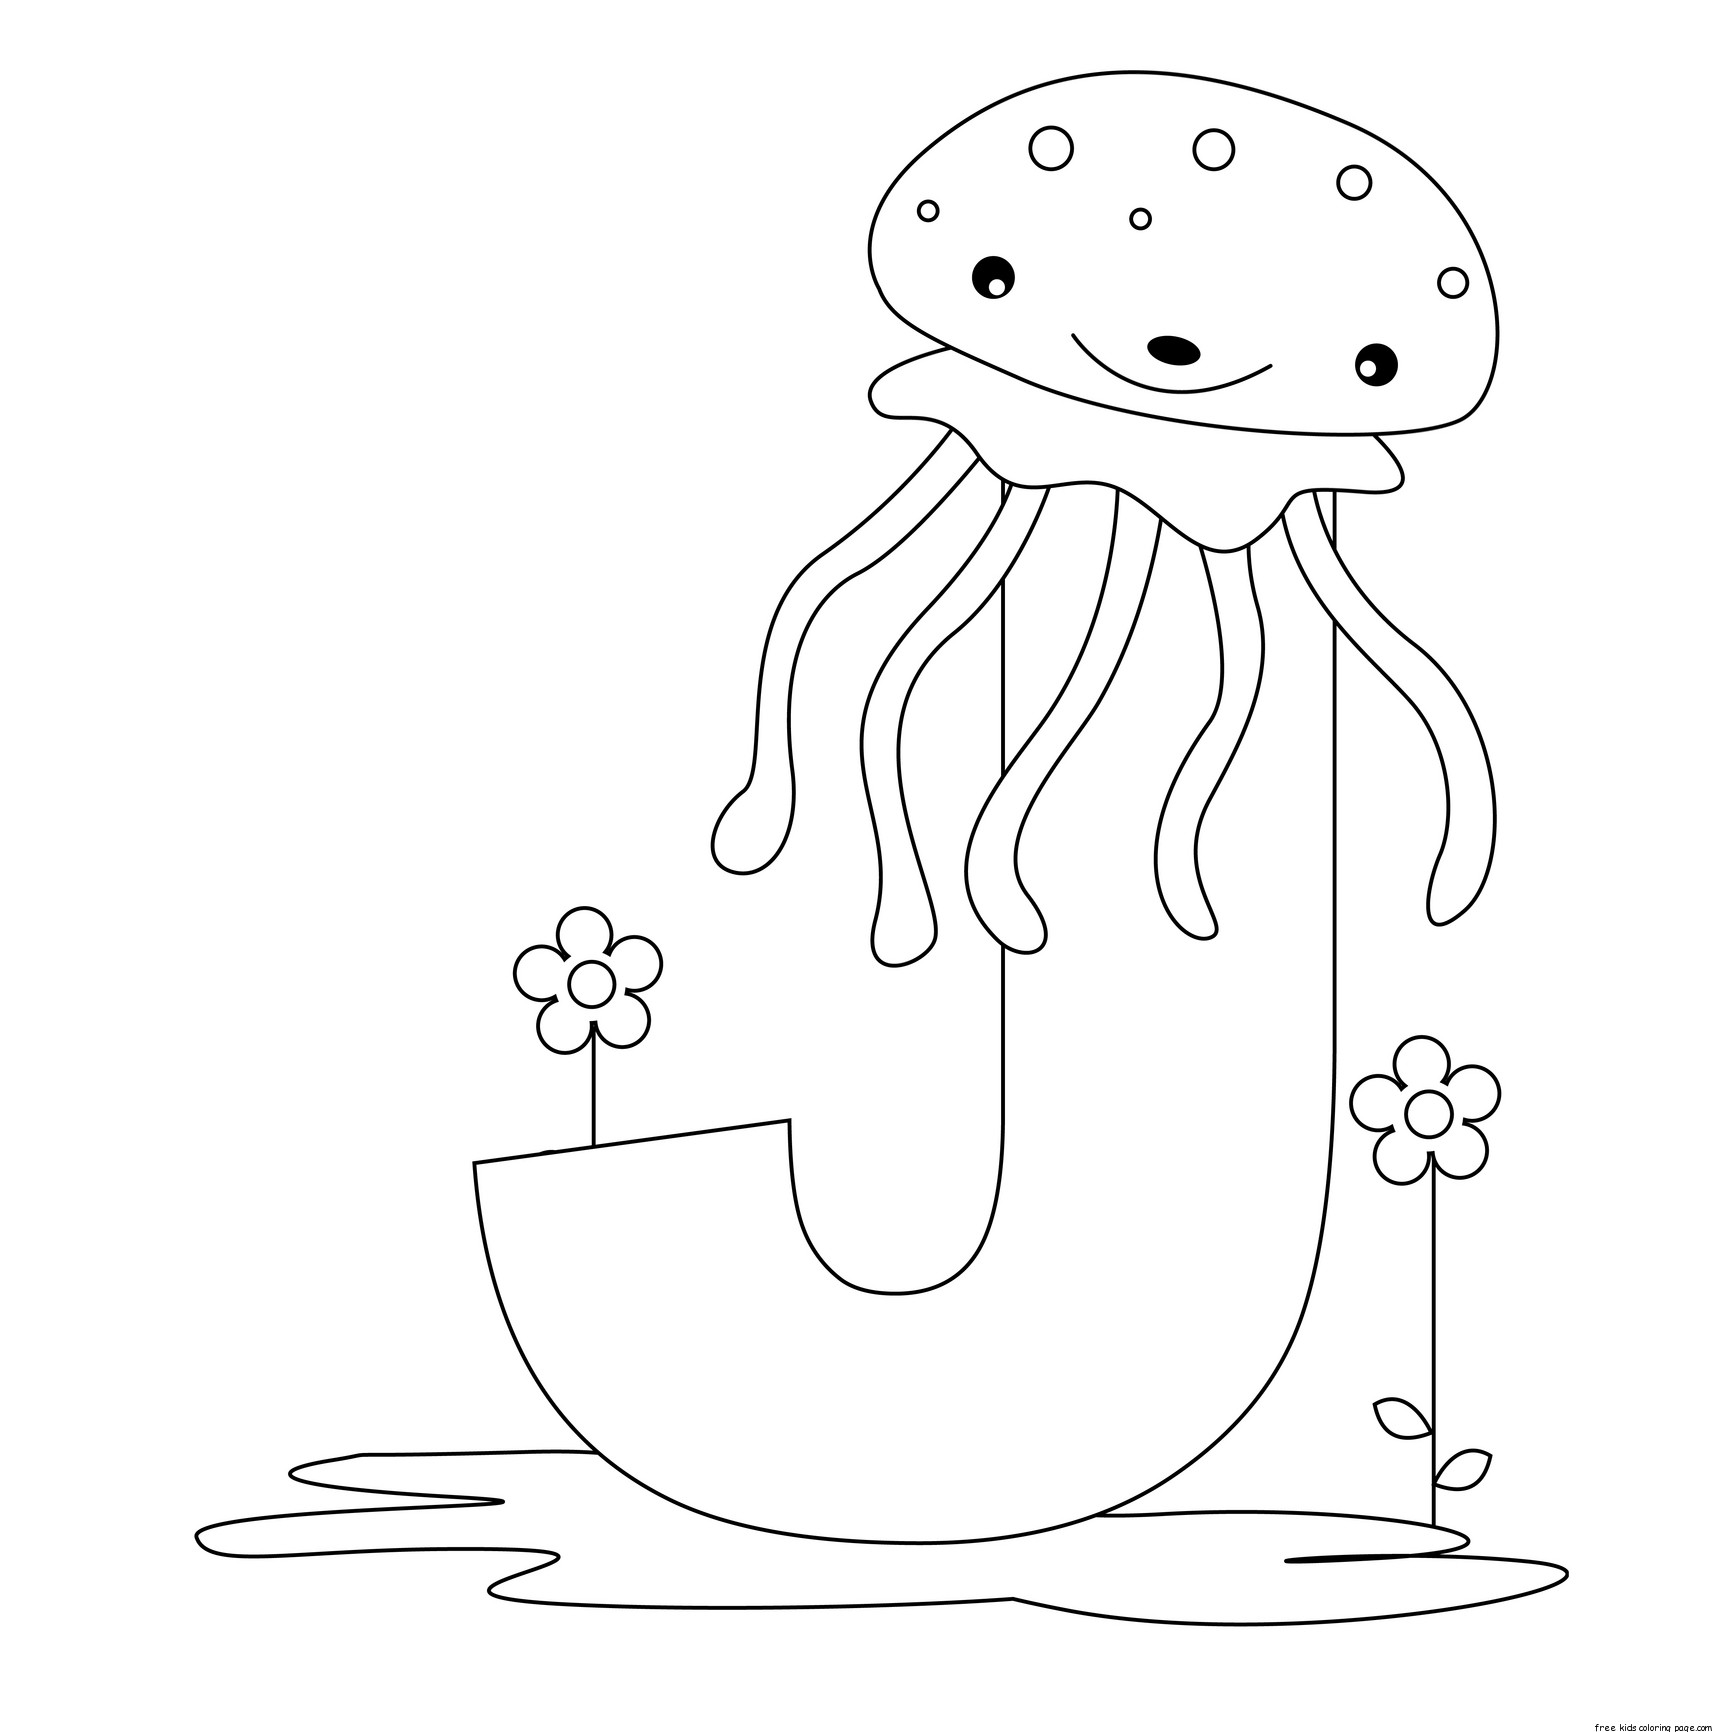 Preschool Letter J Animal Coloring Pages Image